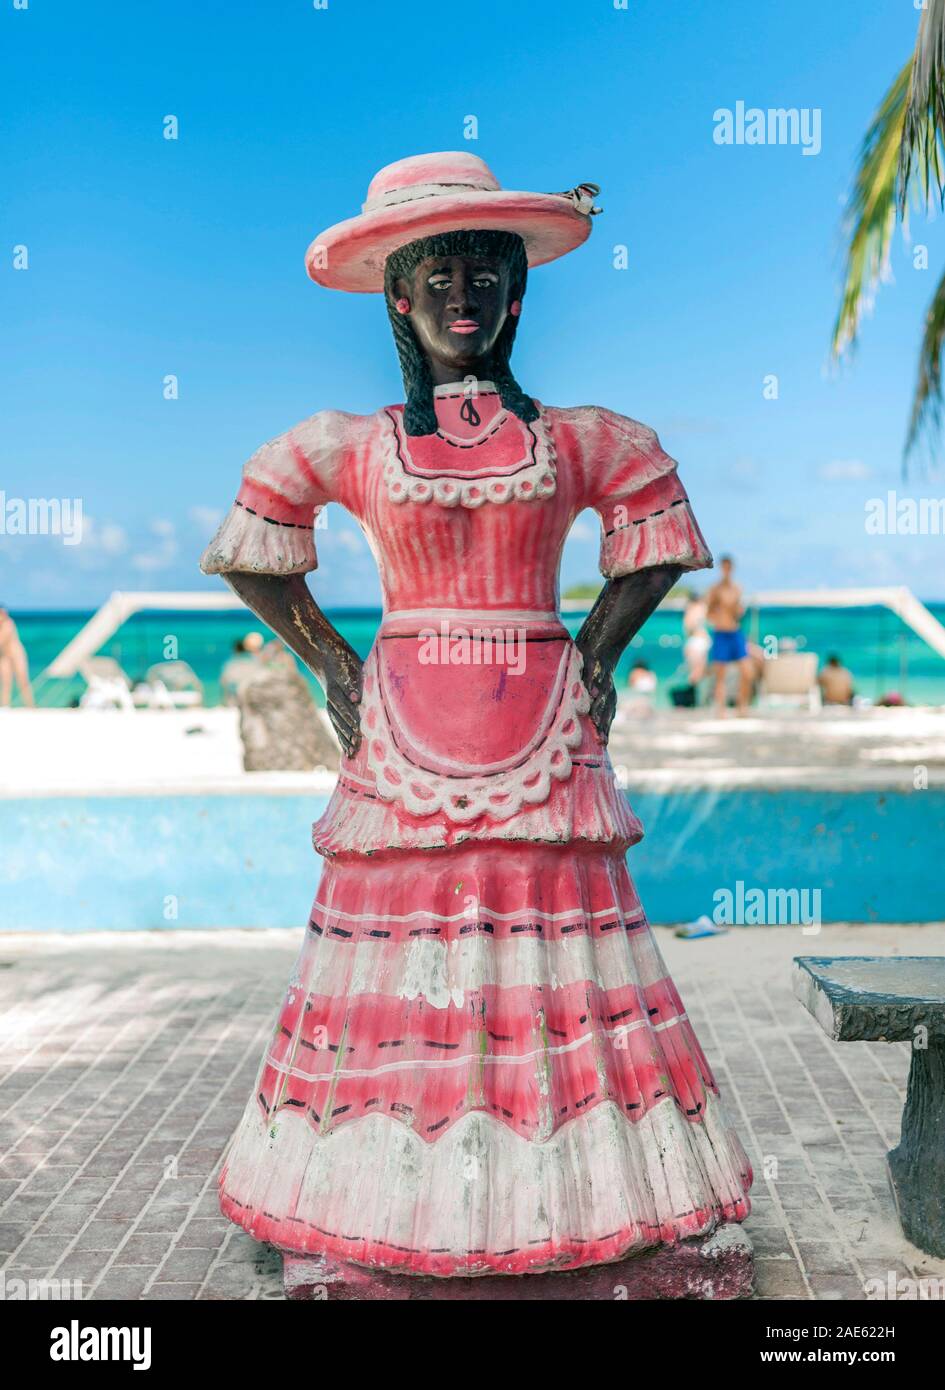 Figurine of a woman on the seafront promenade on the island of San Andres, Colombia. Stock Photo